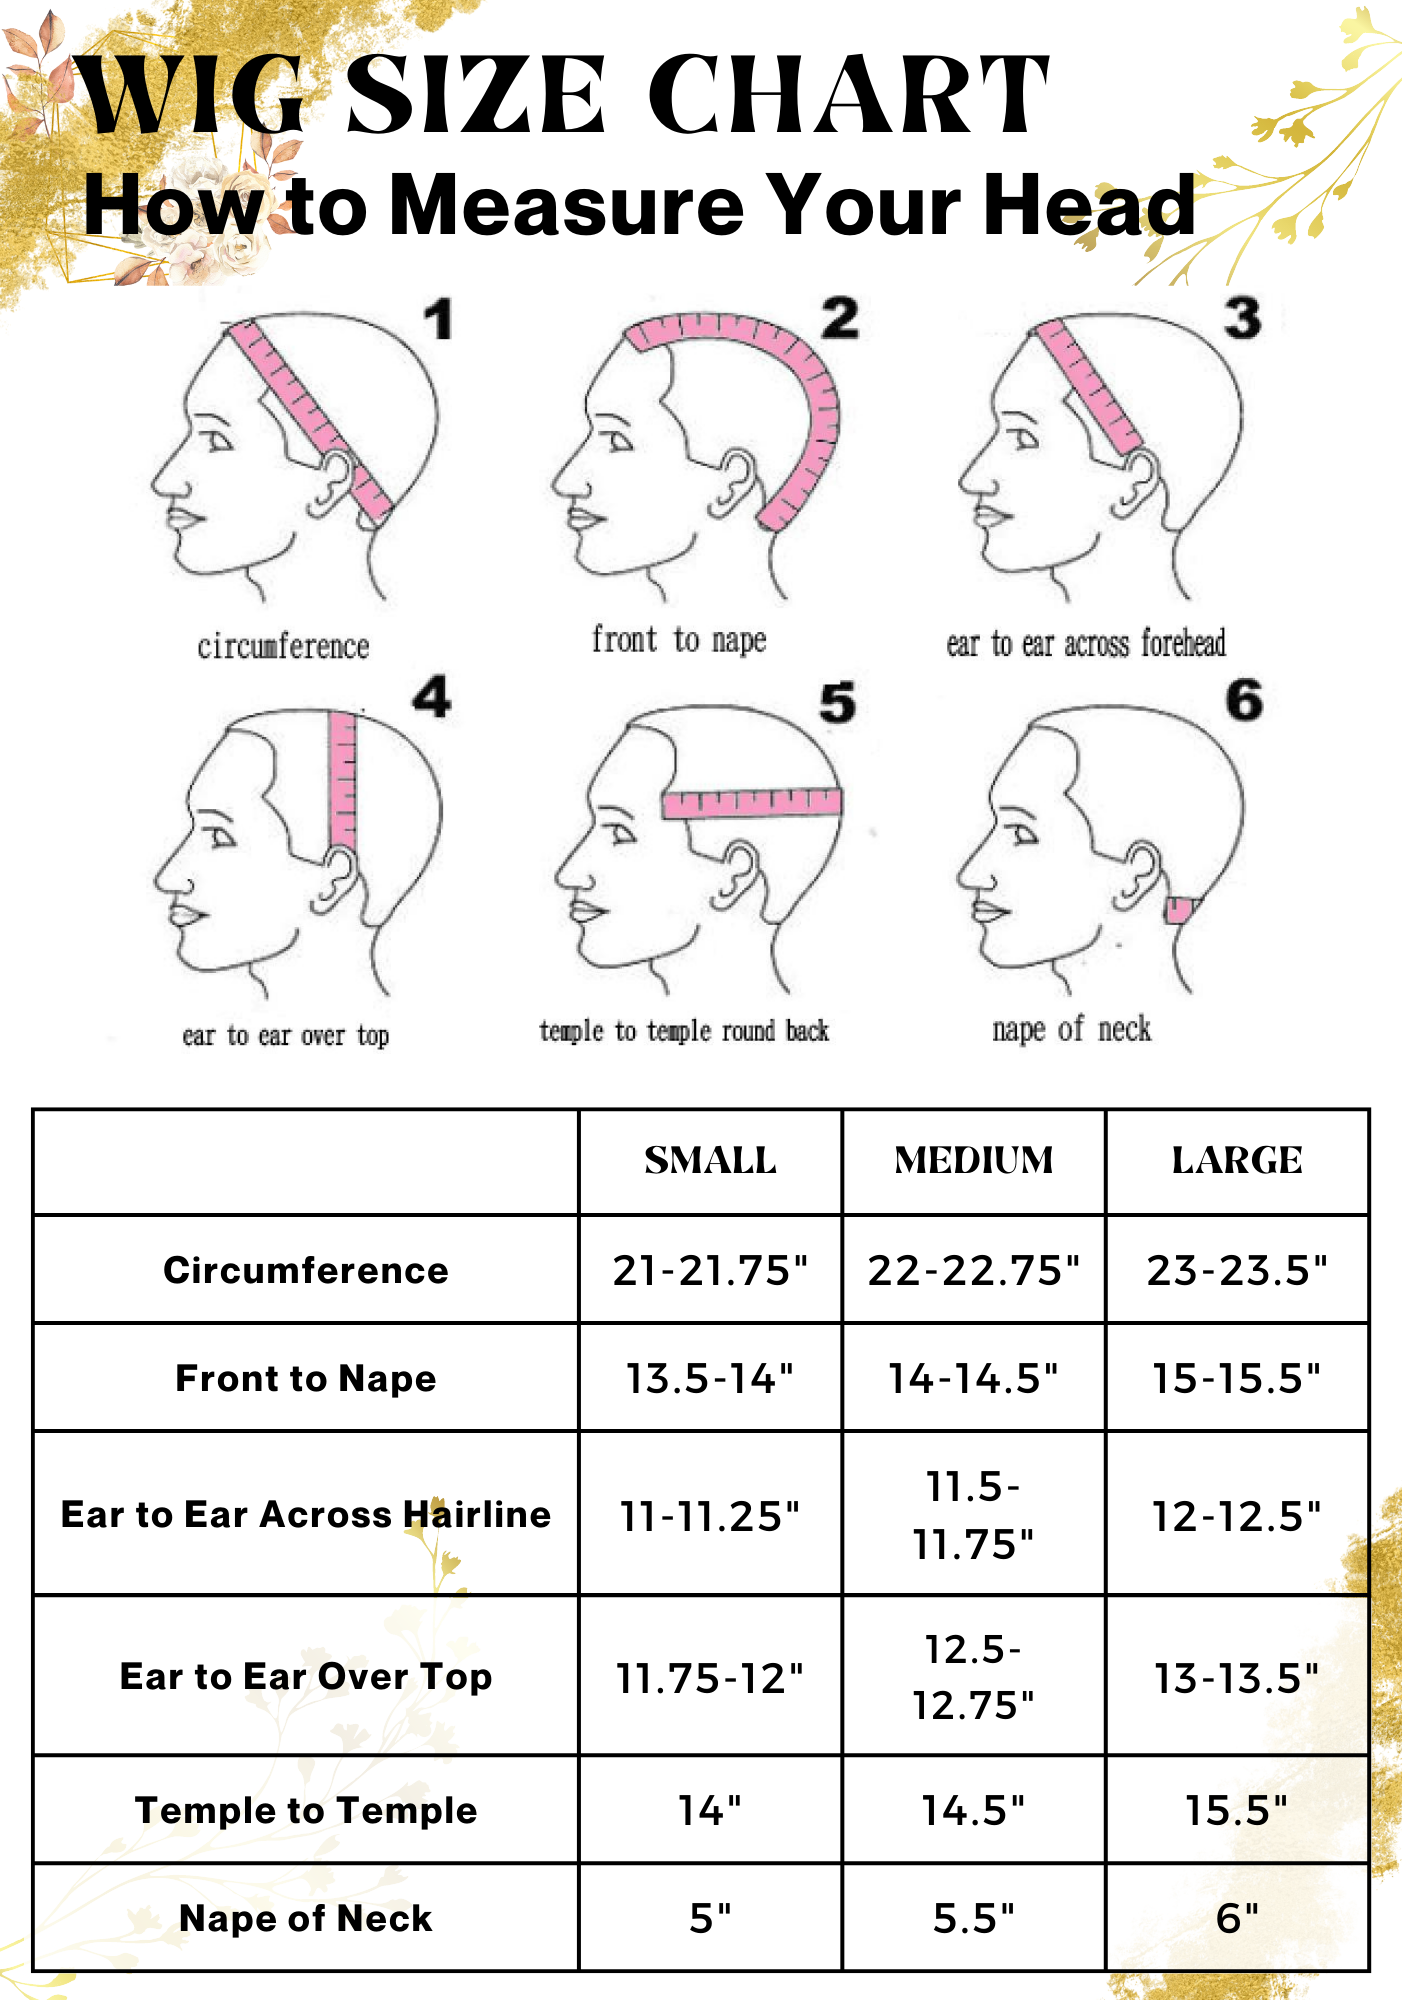 HOW TO MEASURE YOUR HEAD FOR A WIG